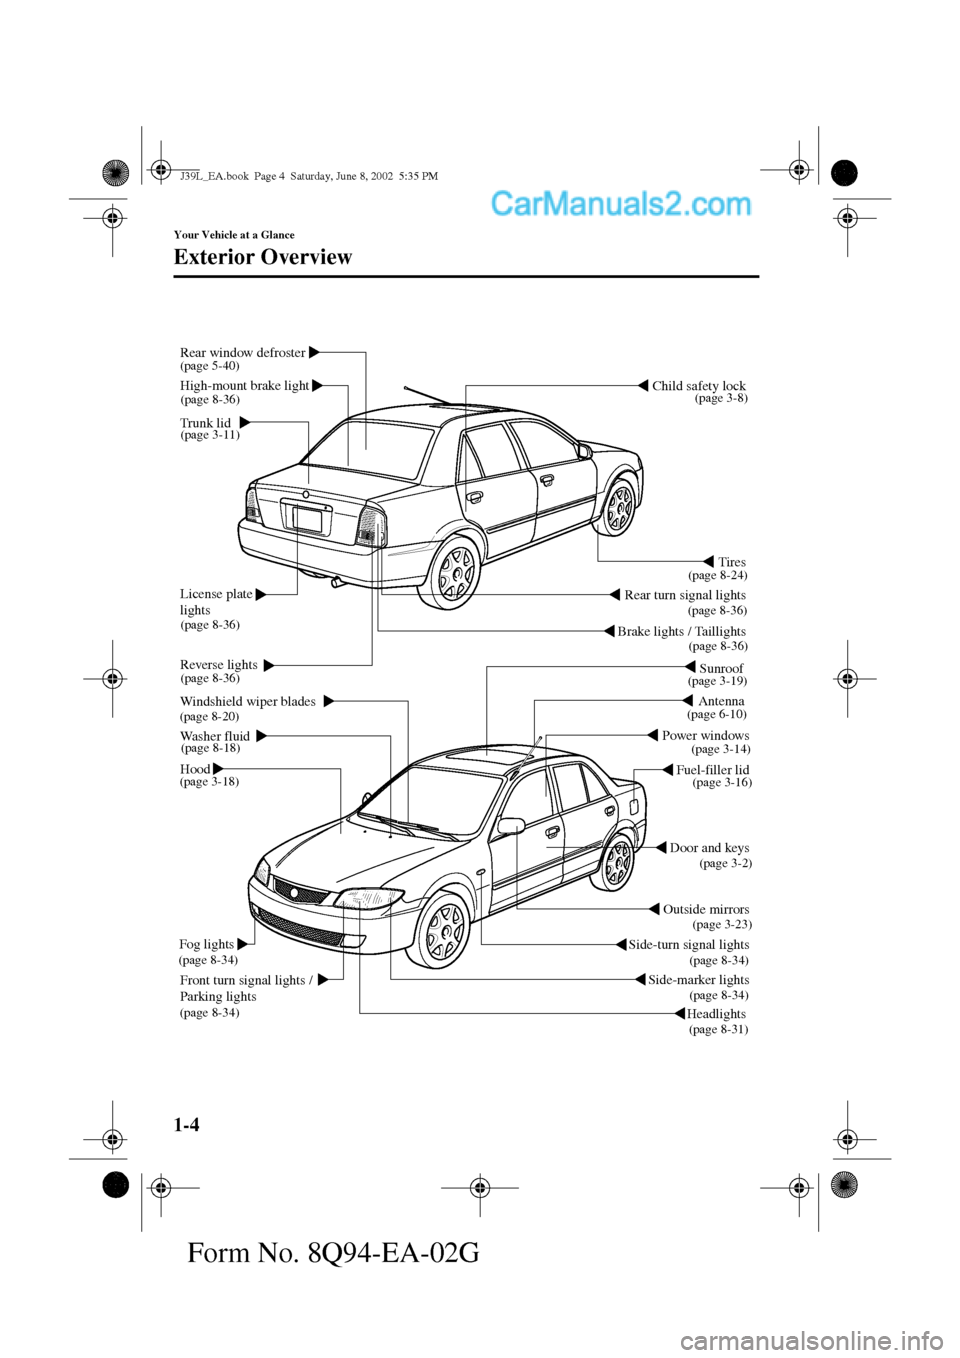 MAZDA MODEL PROTÉGÉ 2003  Owners Manual (in English) 1-4
Your Vehicle at a Glance
Form No. 8Q94-EA-02G
Exterior Overview
Door and keys
Outside mirrors
Side-marker lights
Headlights  Fuel-filler lid Child safety lock 
Tires 
Reverse lights
Windshield wip